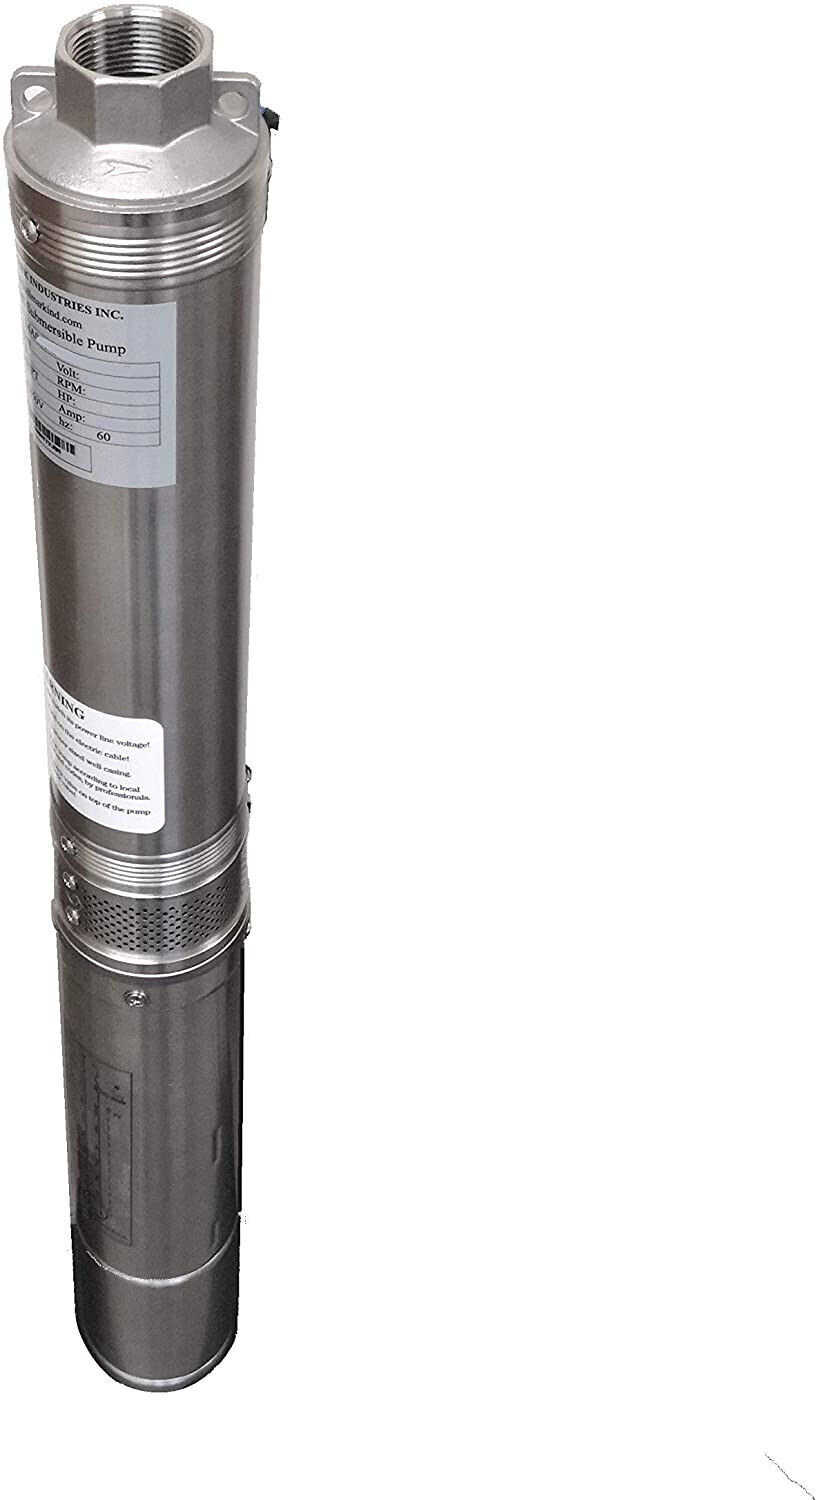 MA0419X-12A, Deep Well Submersible Pump, 2HP, 230V 60HZ, 33 Gpm, Stainless Steel